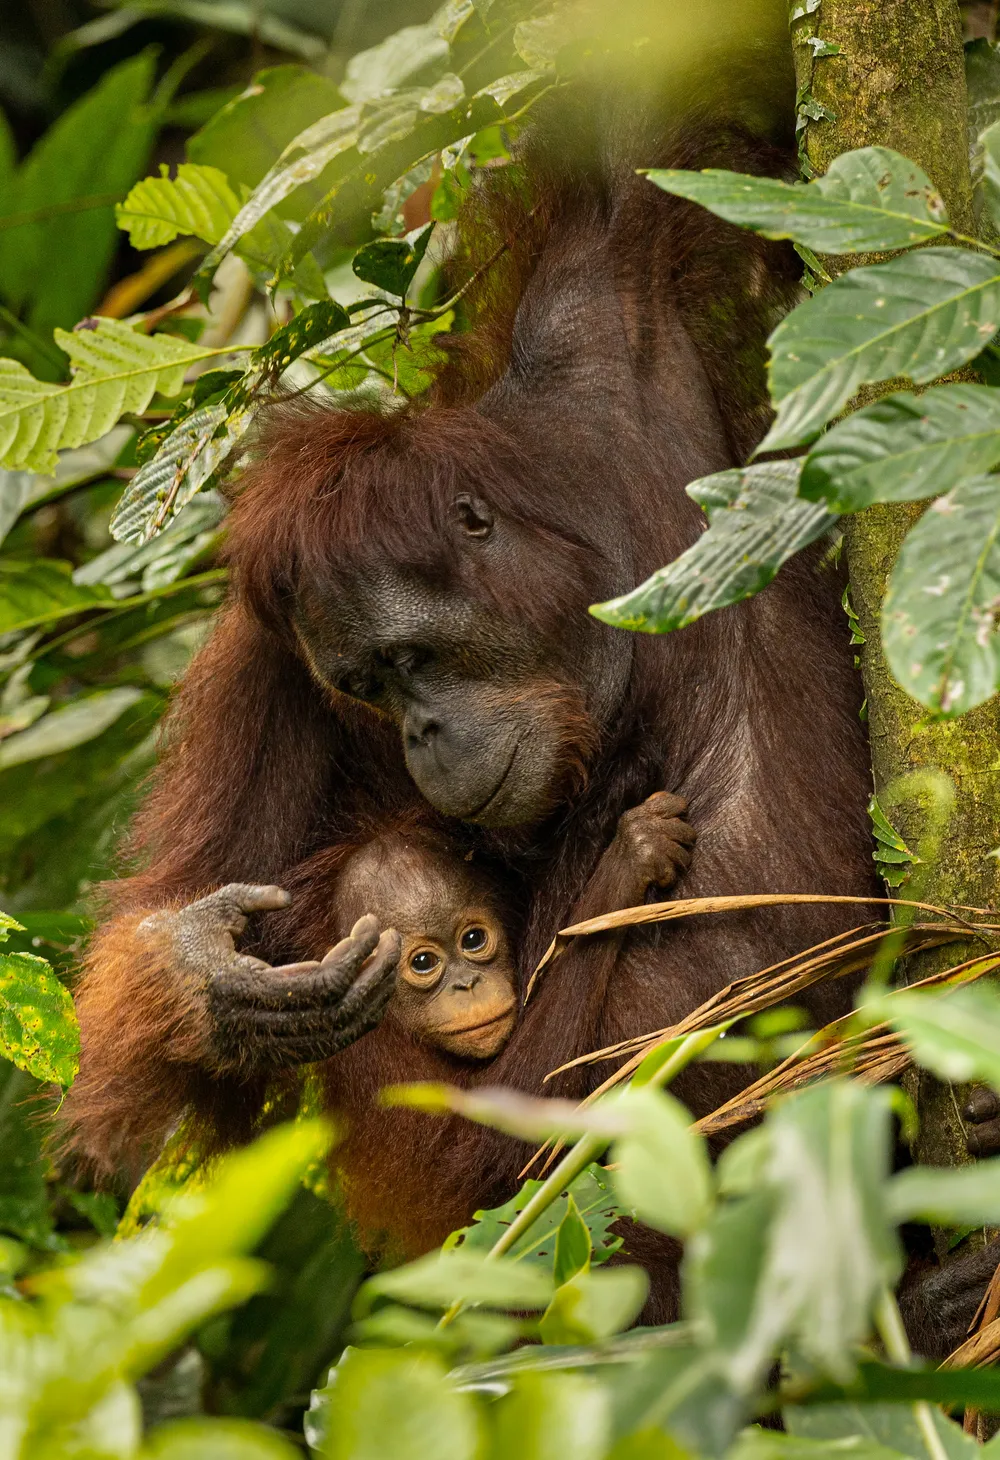 Photographed in Tabin Wildlife Reserve in Sabah, Malaysia, a heartwarming scene unfolds as a mother orangutan engages in playful antics with her adorable young offspring. Mother orangutans are very caring mothers and must tend to all their baby’s needs for the first several years. This moment was even more poignant given their highly endangered status. This image was taken in February of 2023.